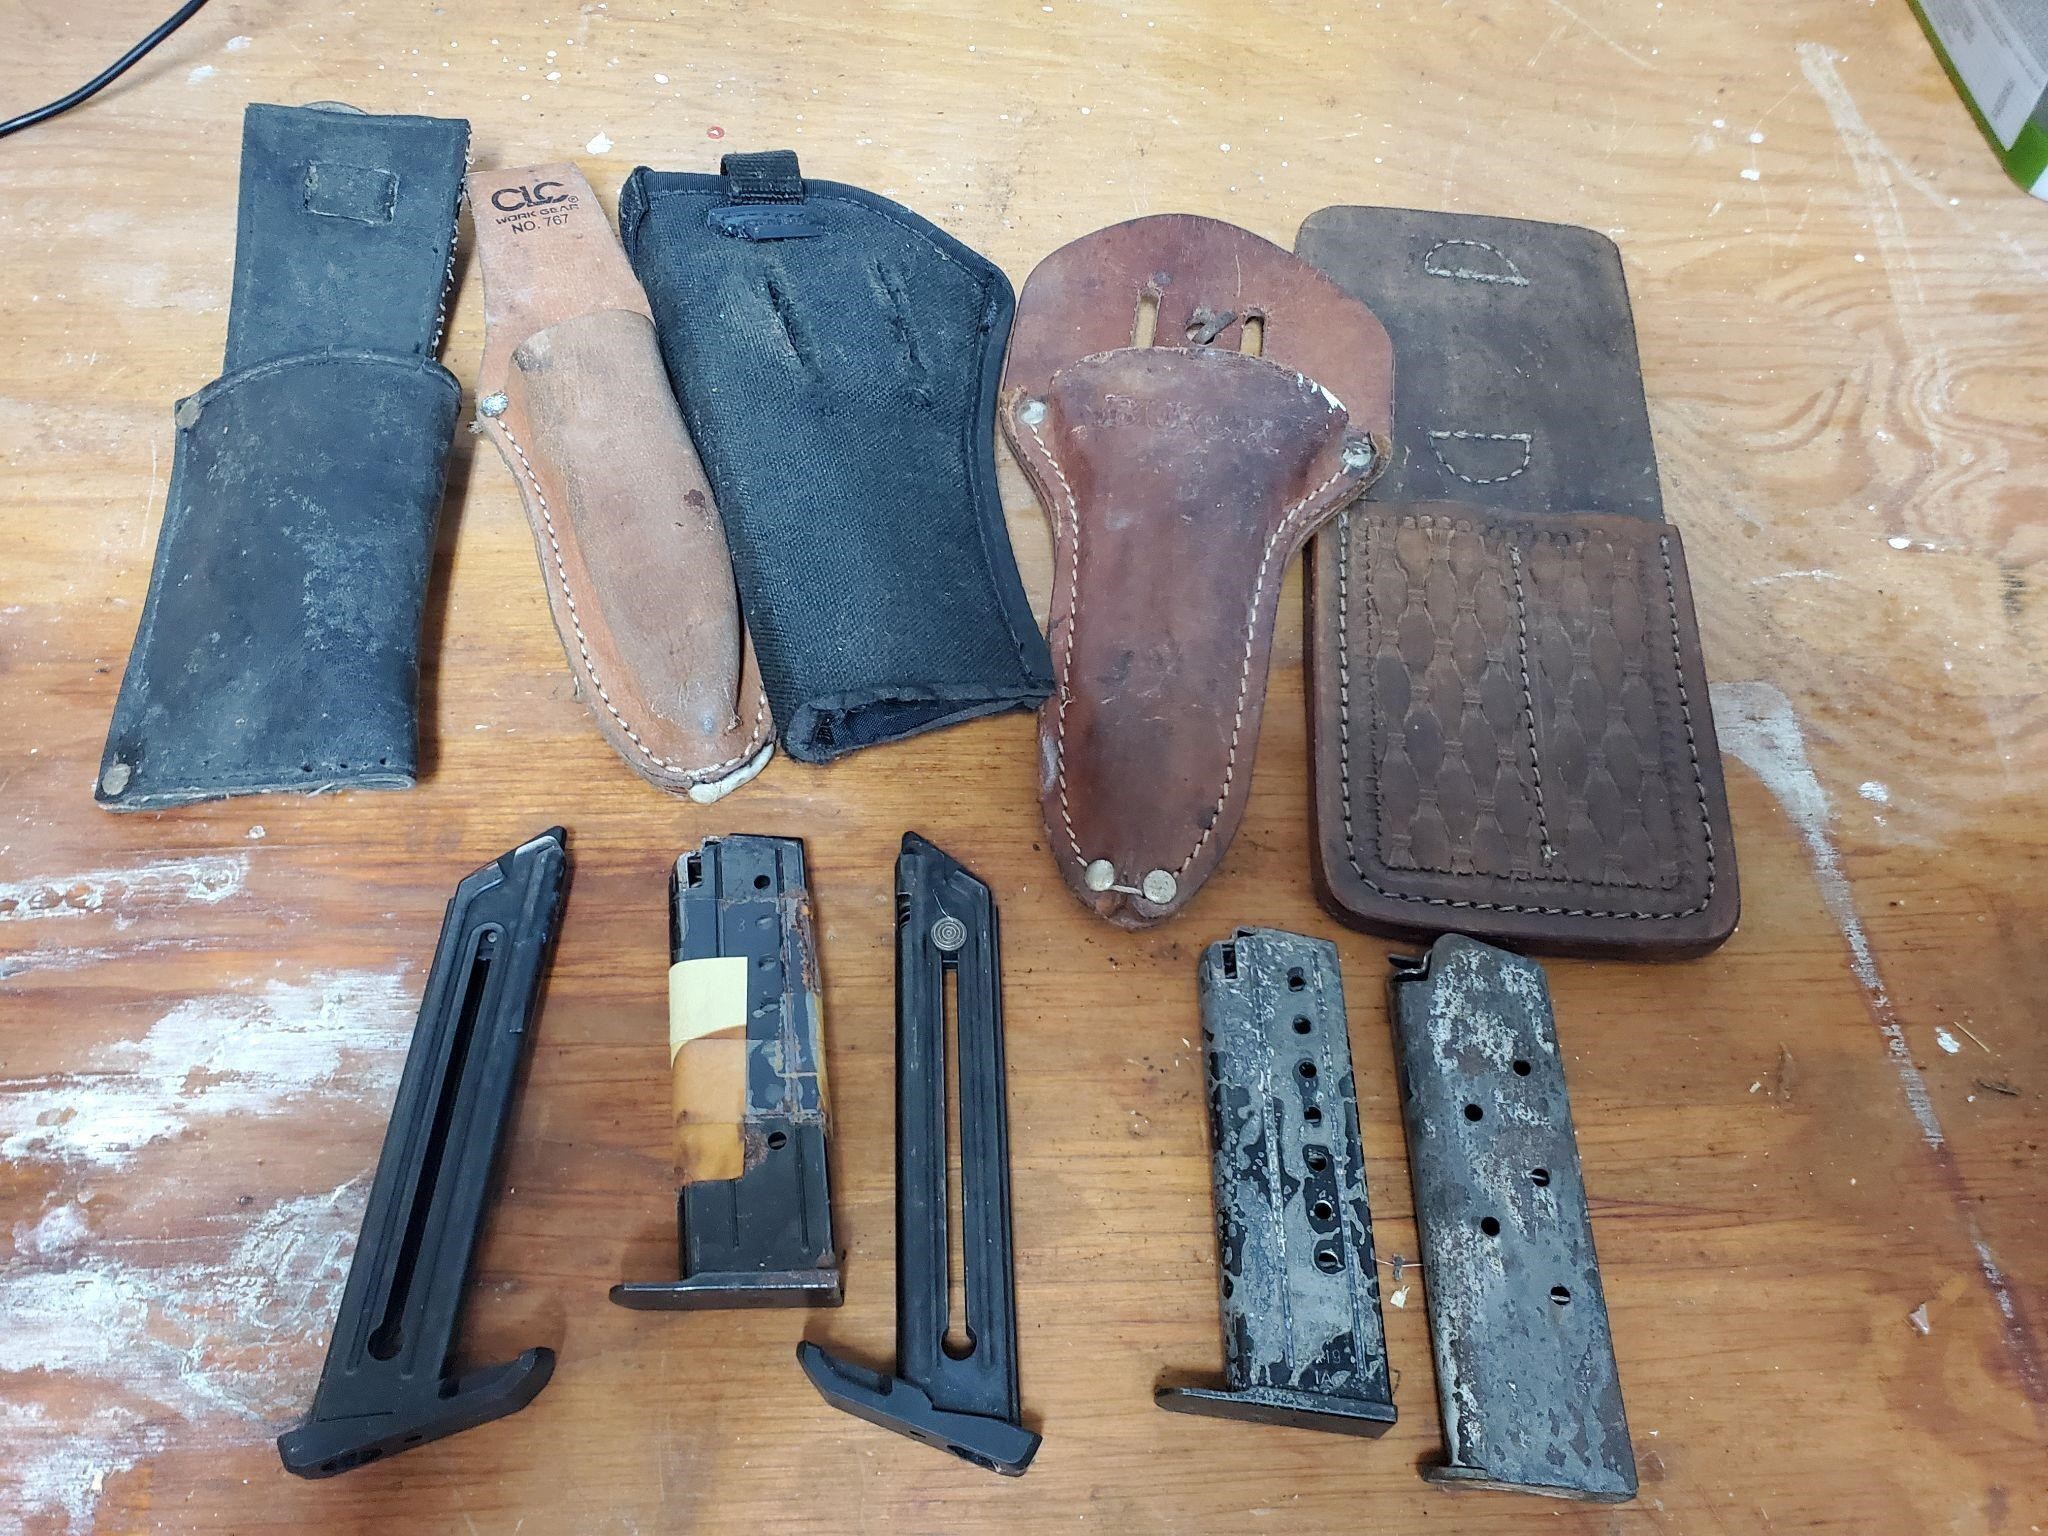 Pistol magazines knife sheath and more